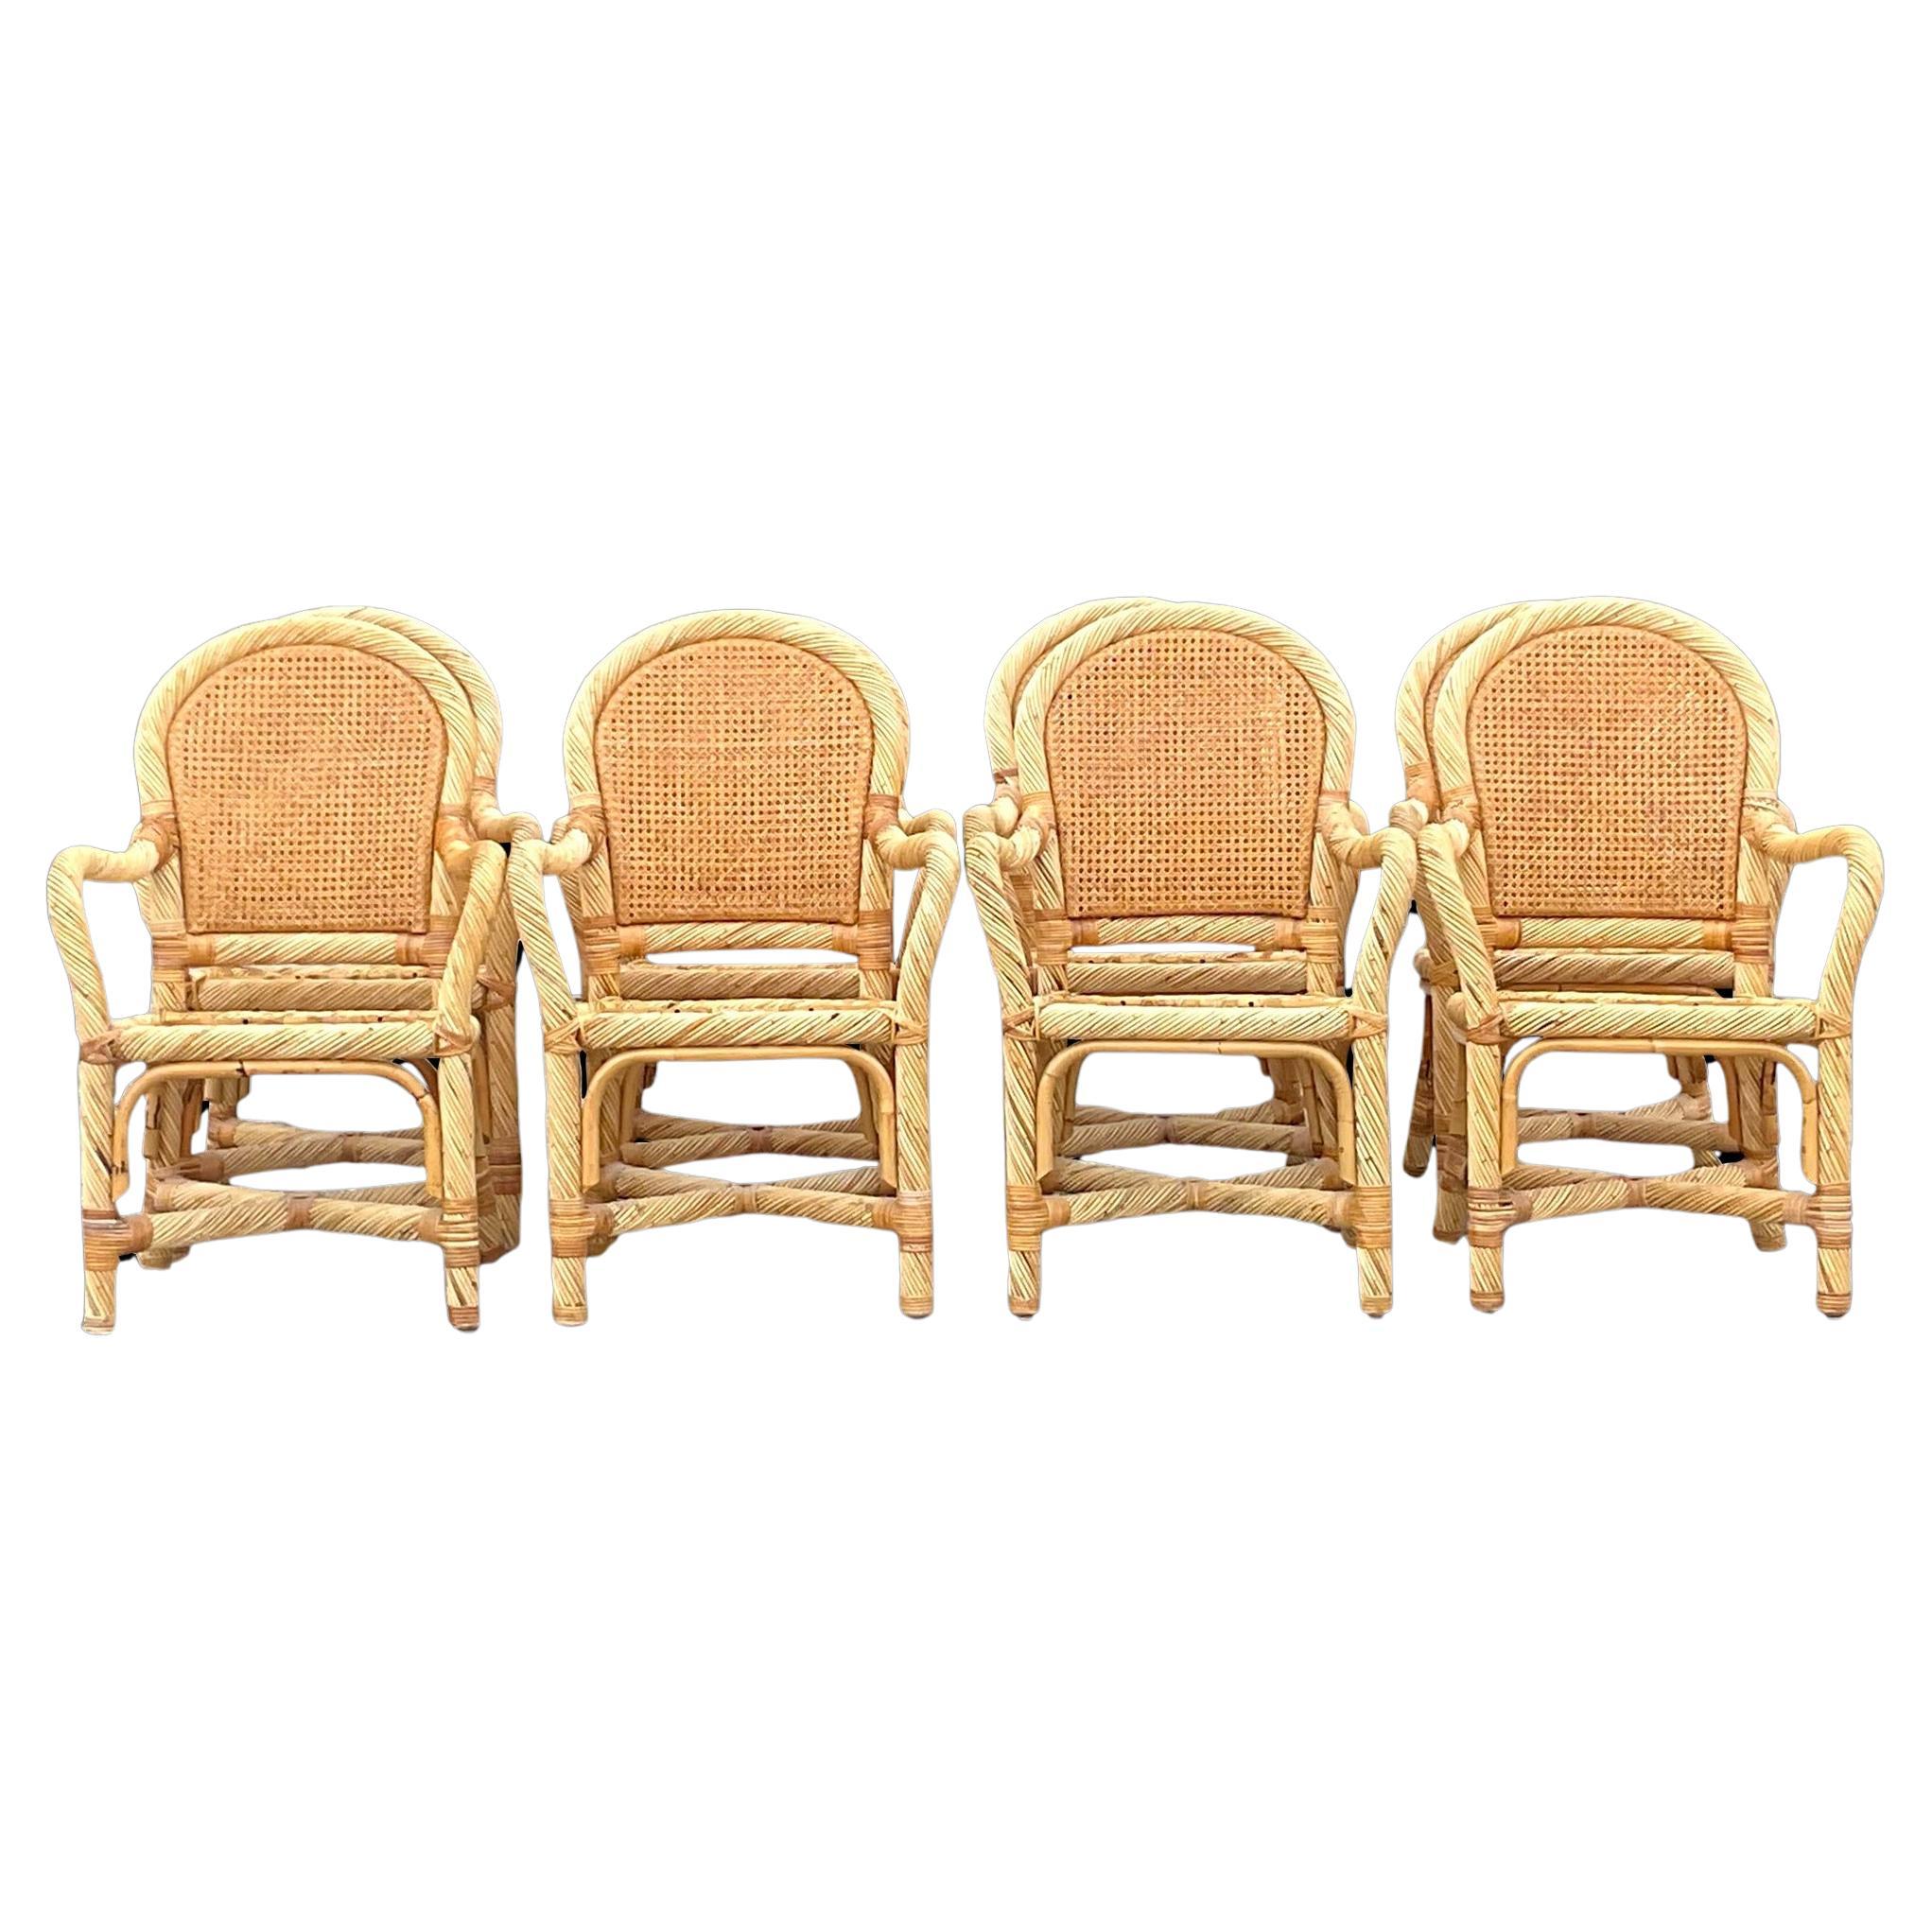 Vintage Coastal Twisted Rattan Dining Chairs - Set of 8